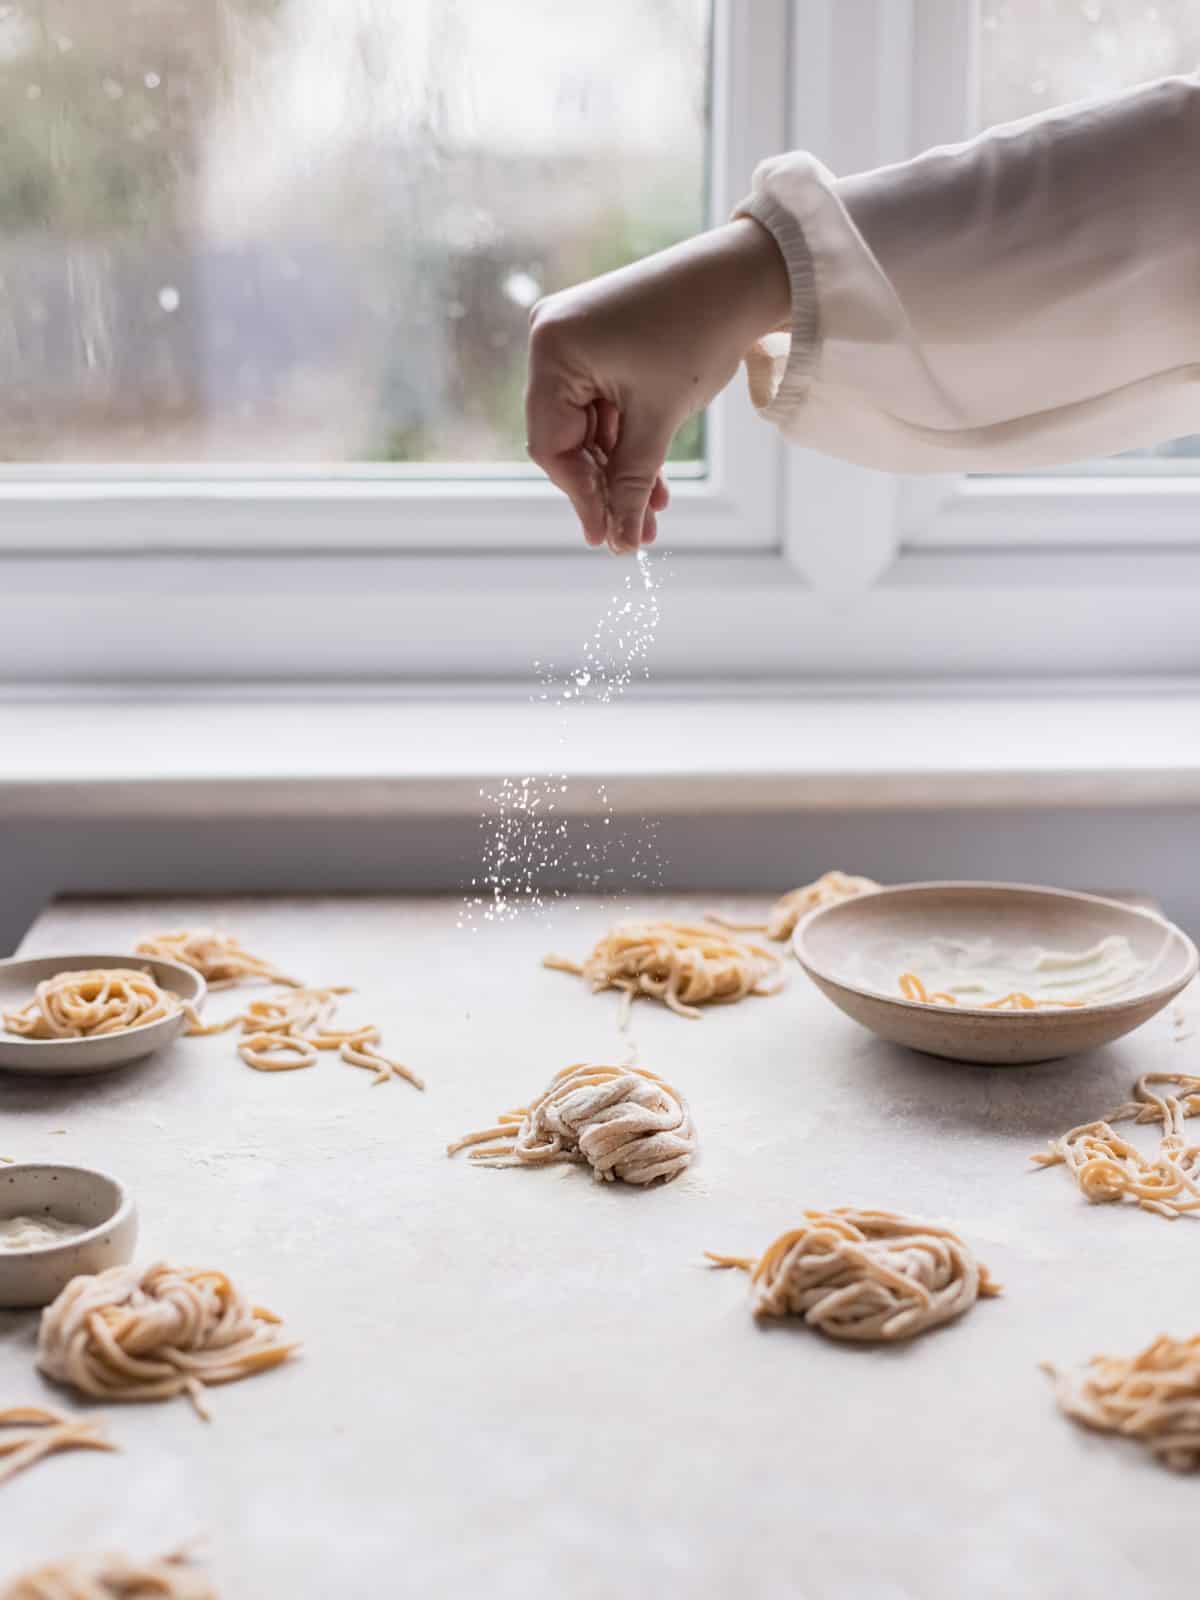 Hand dropping some flour on a pasta nest